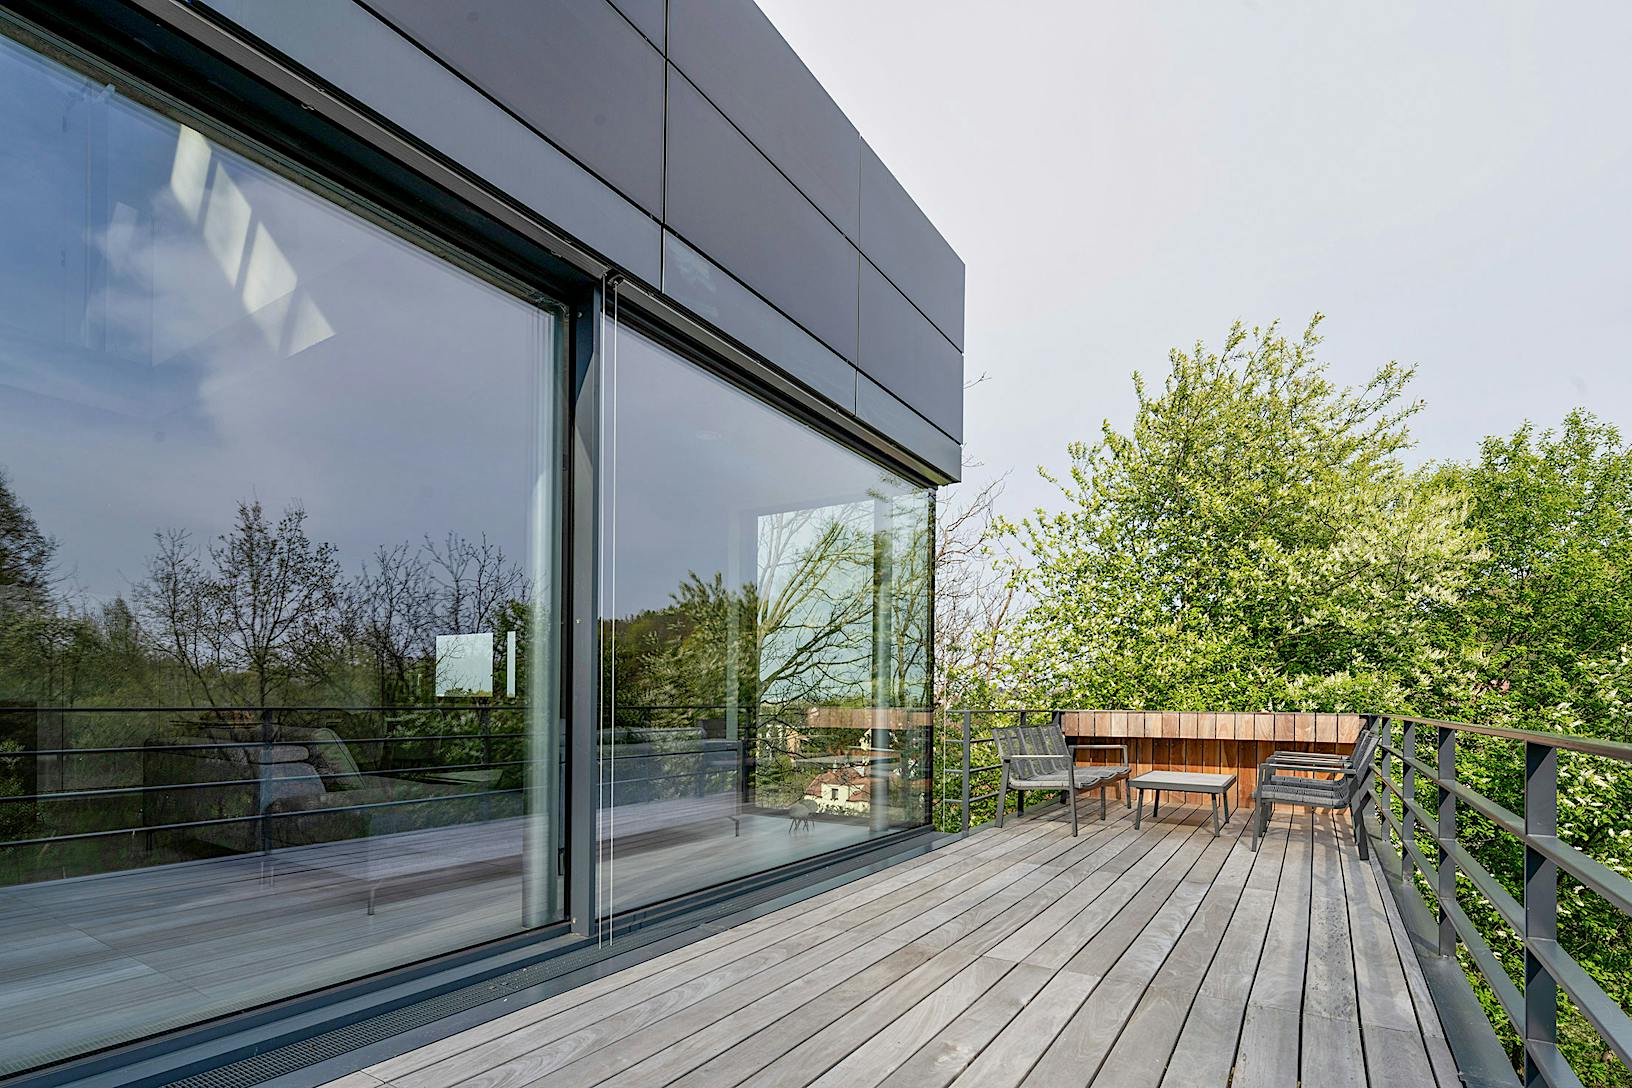 A modern house with a wooden deck and large sliding glass doors